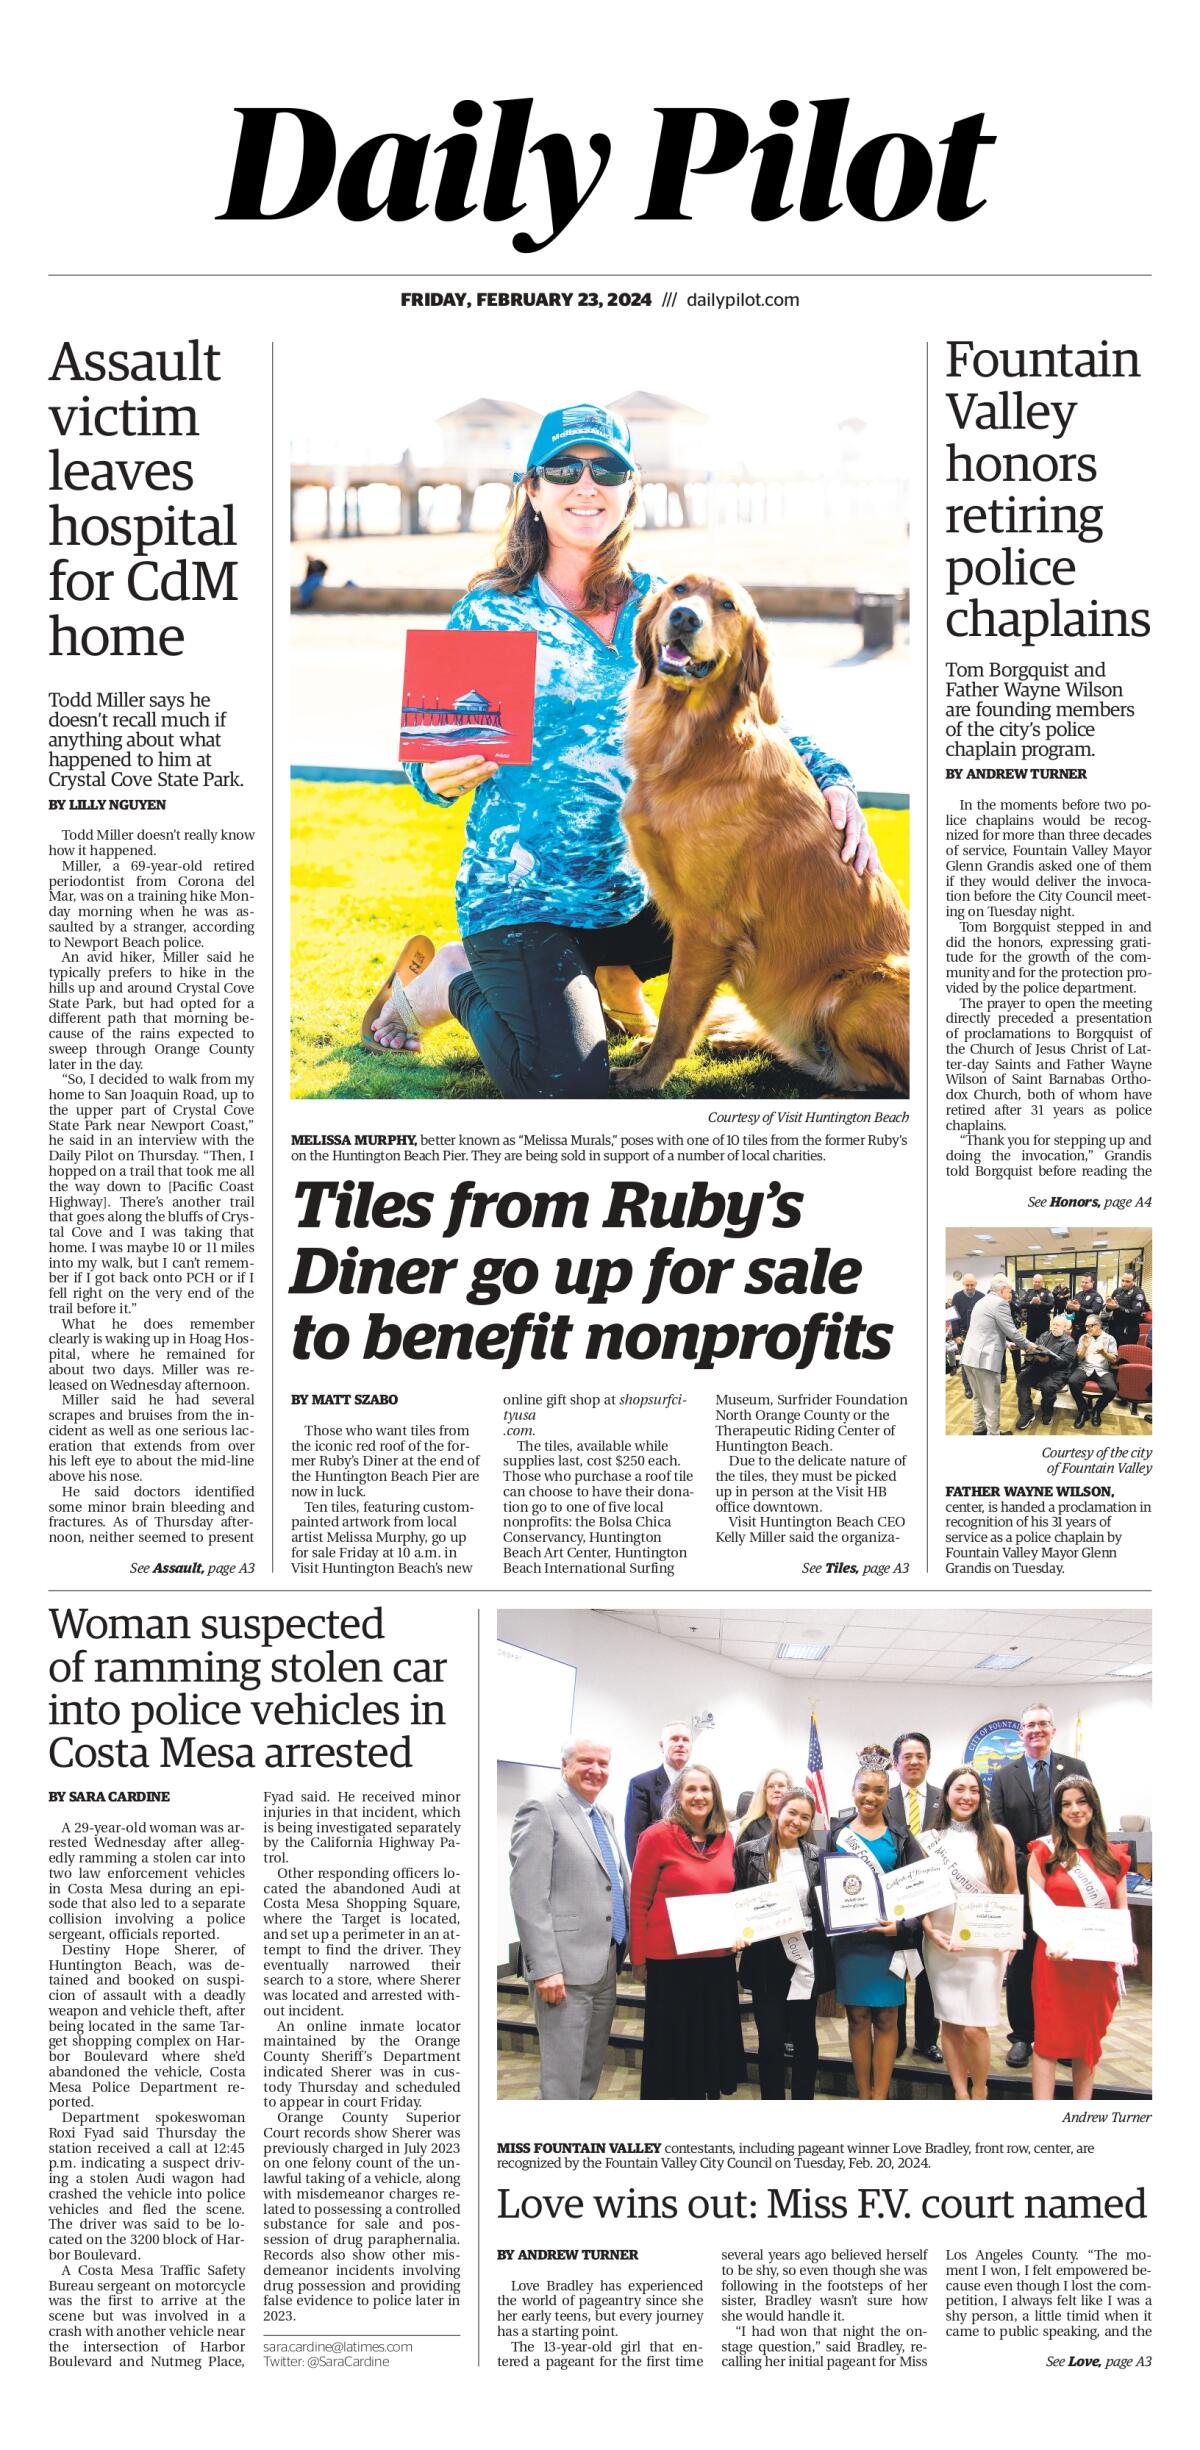 Front page of the Daily Pilot e-newspaper for Friday, Feb. 23, 2024.